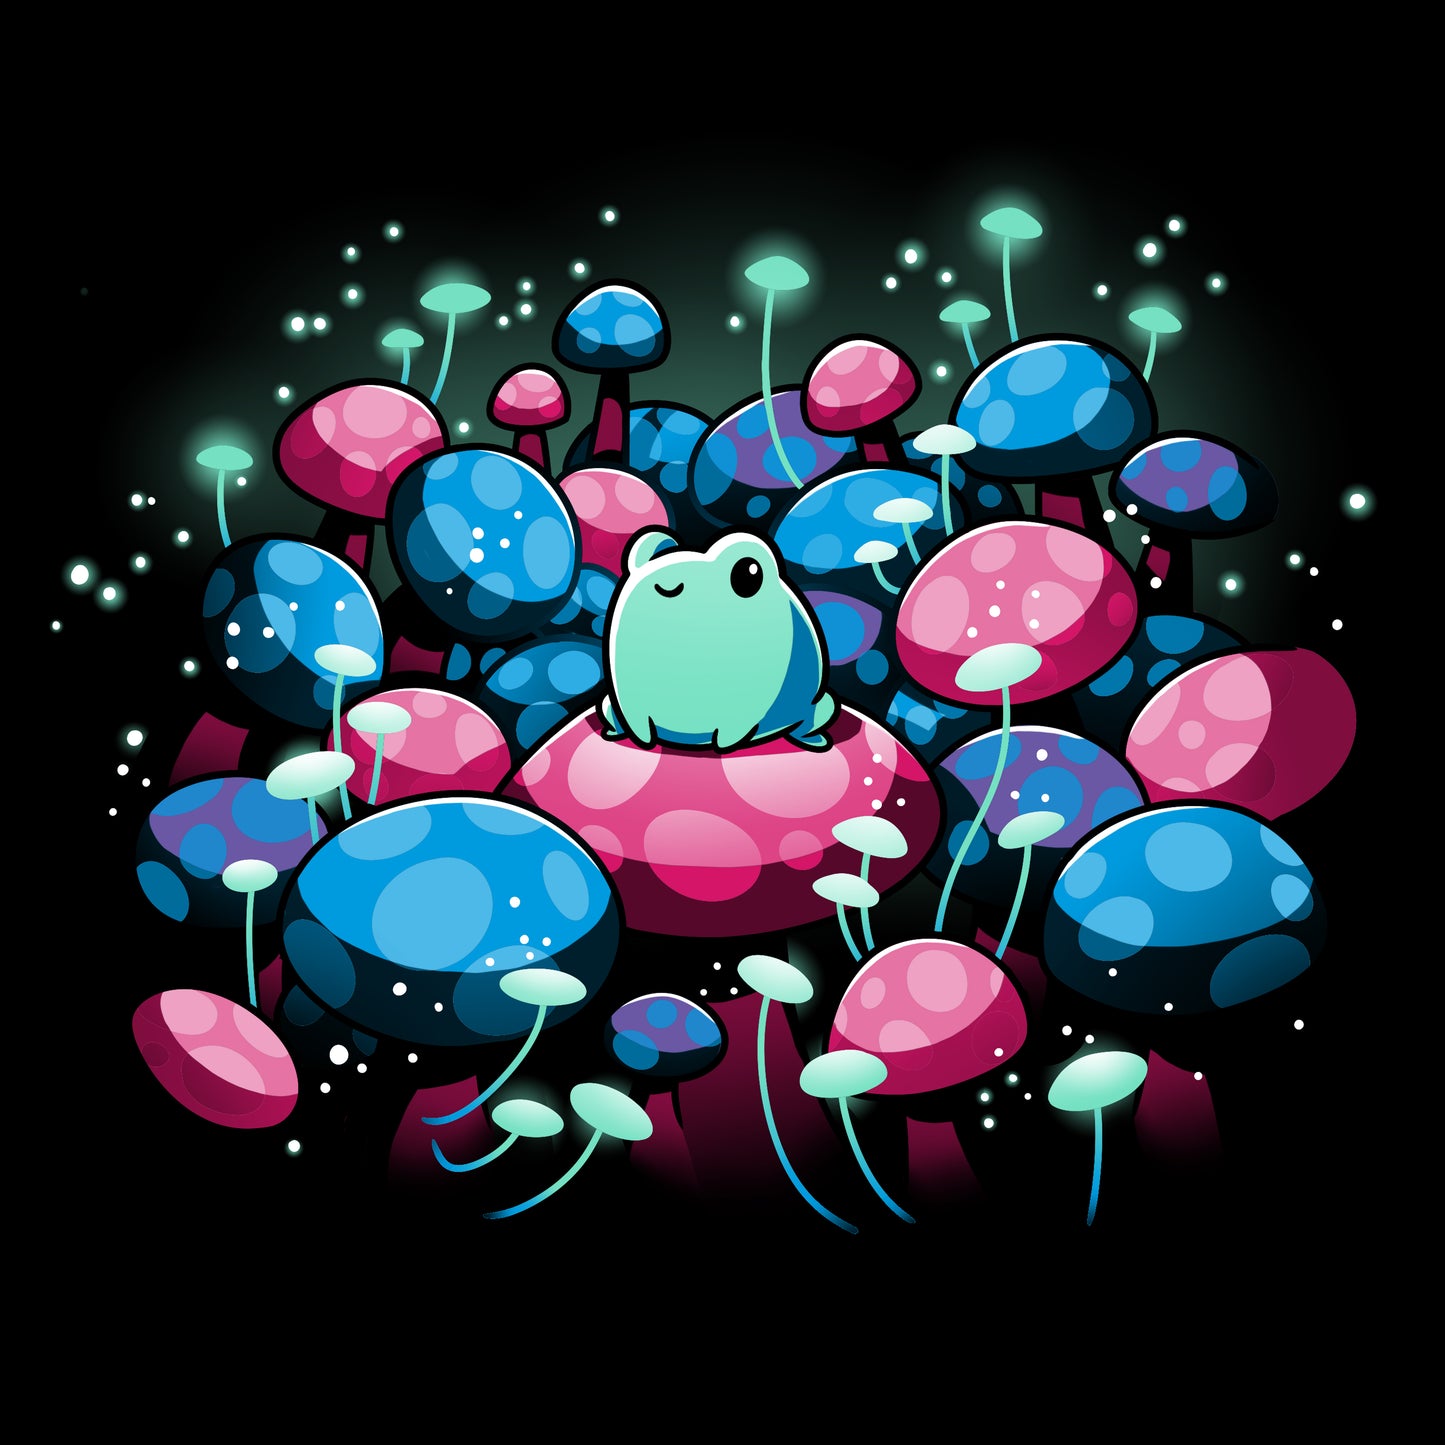 A frog sitting in an enchanted Mushroom Forest wearing a TeeTurtle t-shirt.